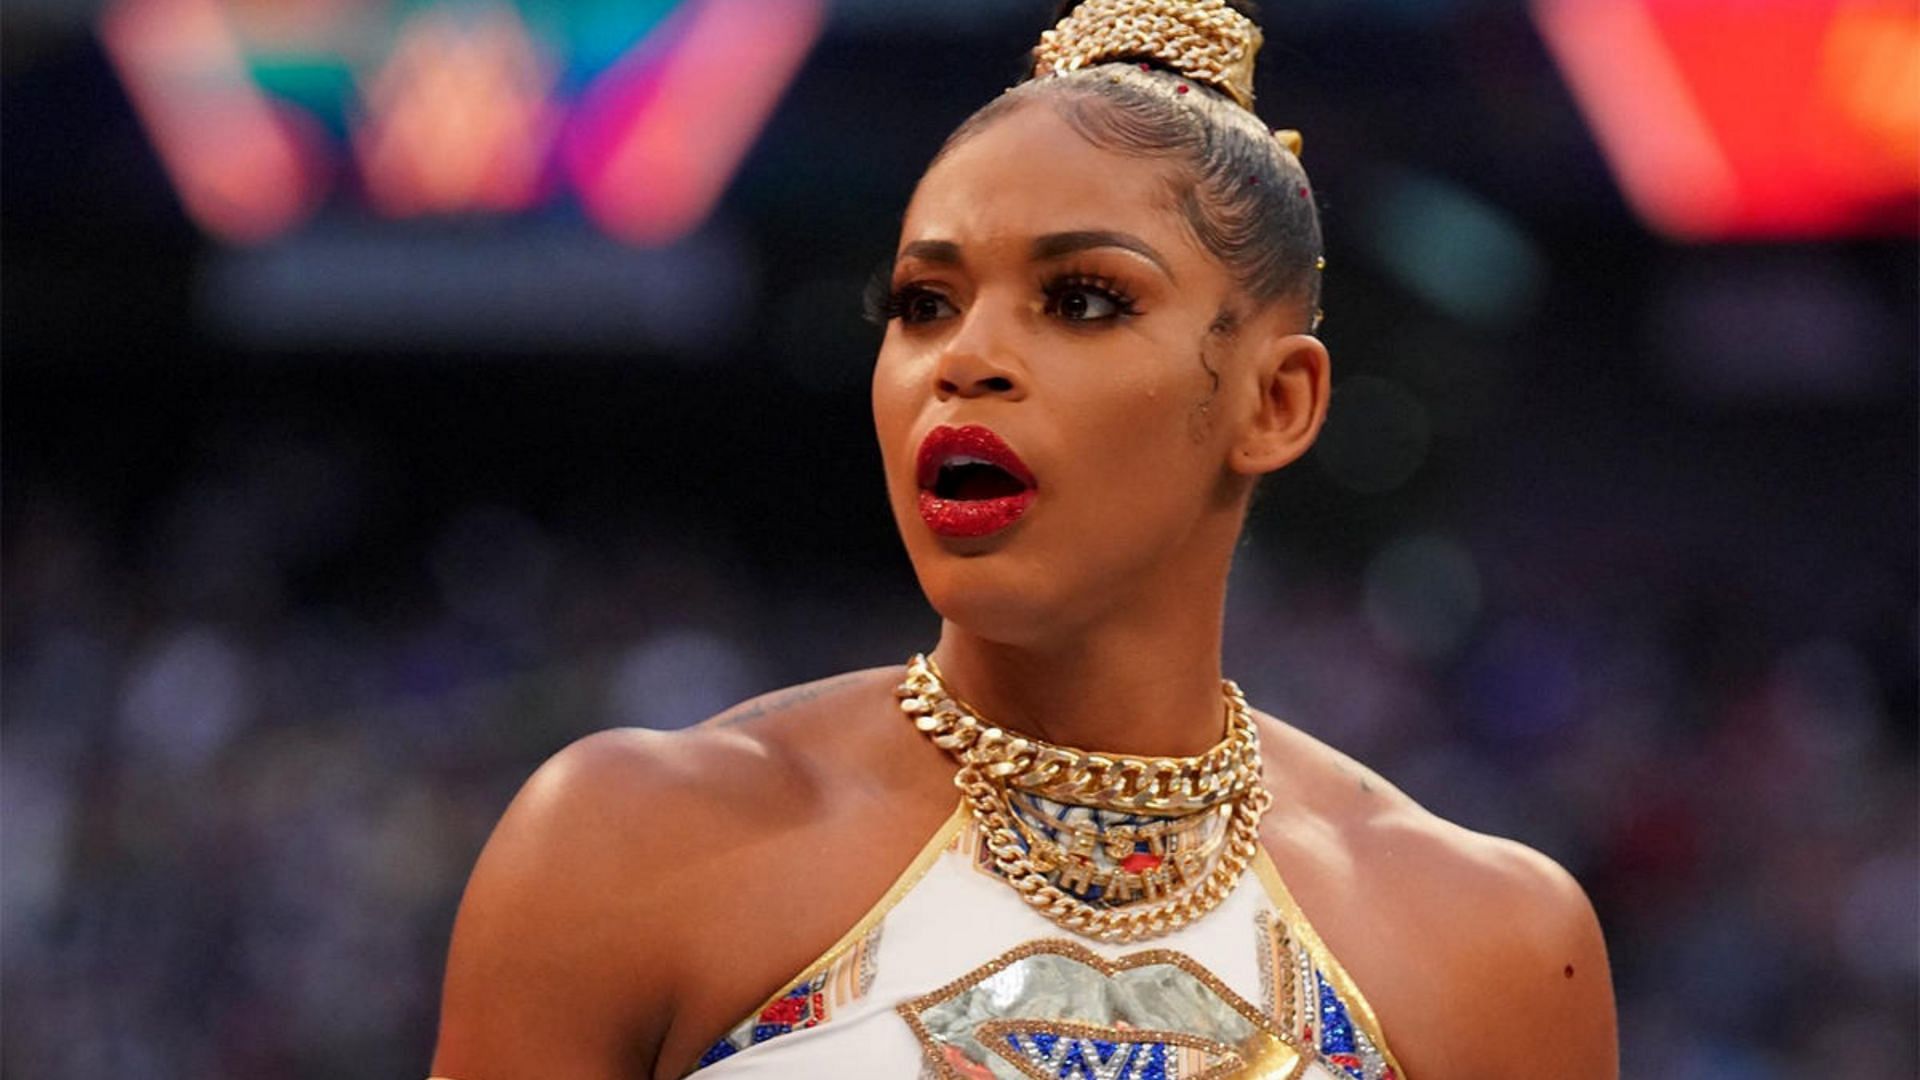 Who should Bianca Belair face at WWE WrestleMania 40?